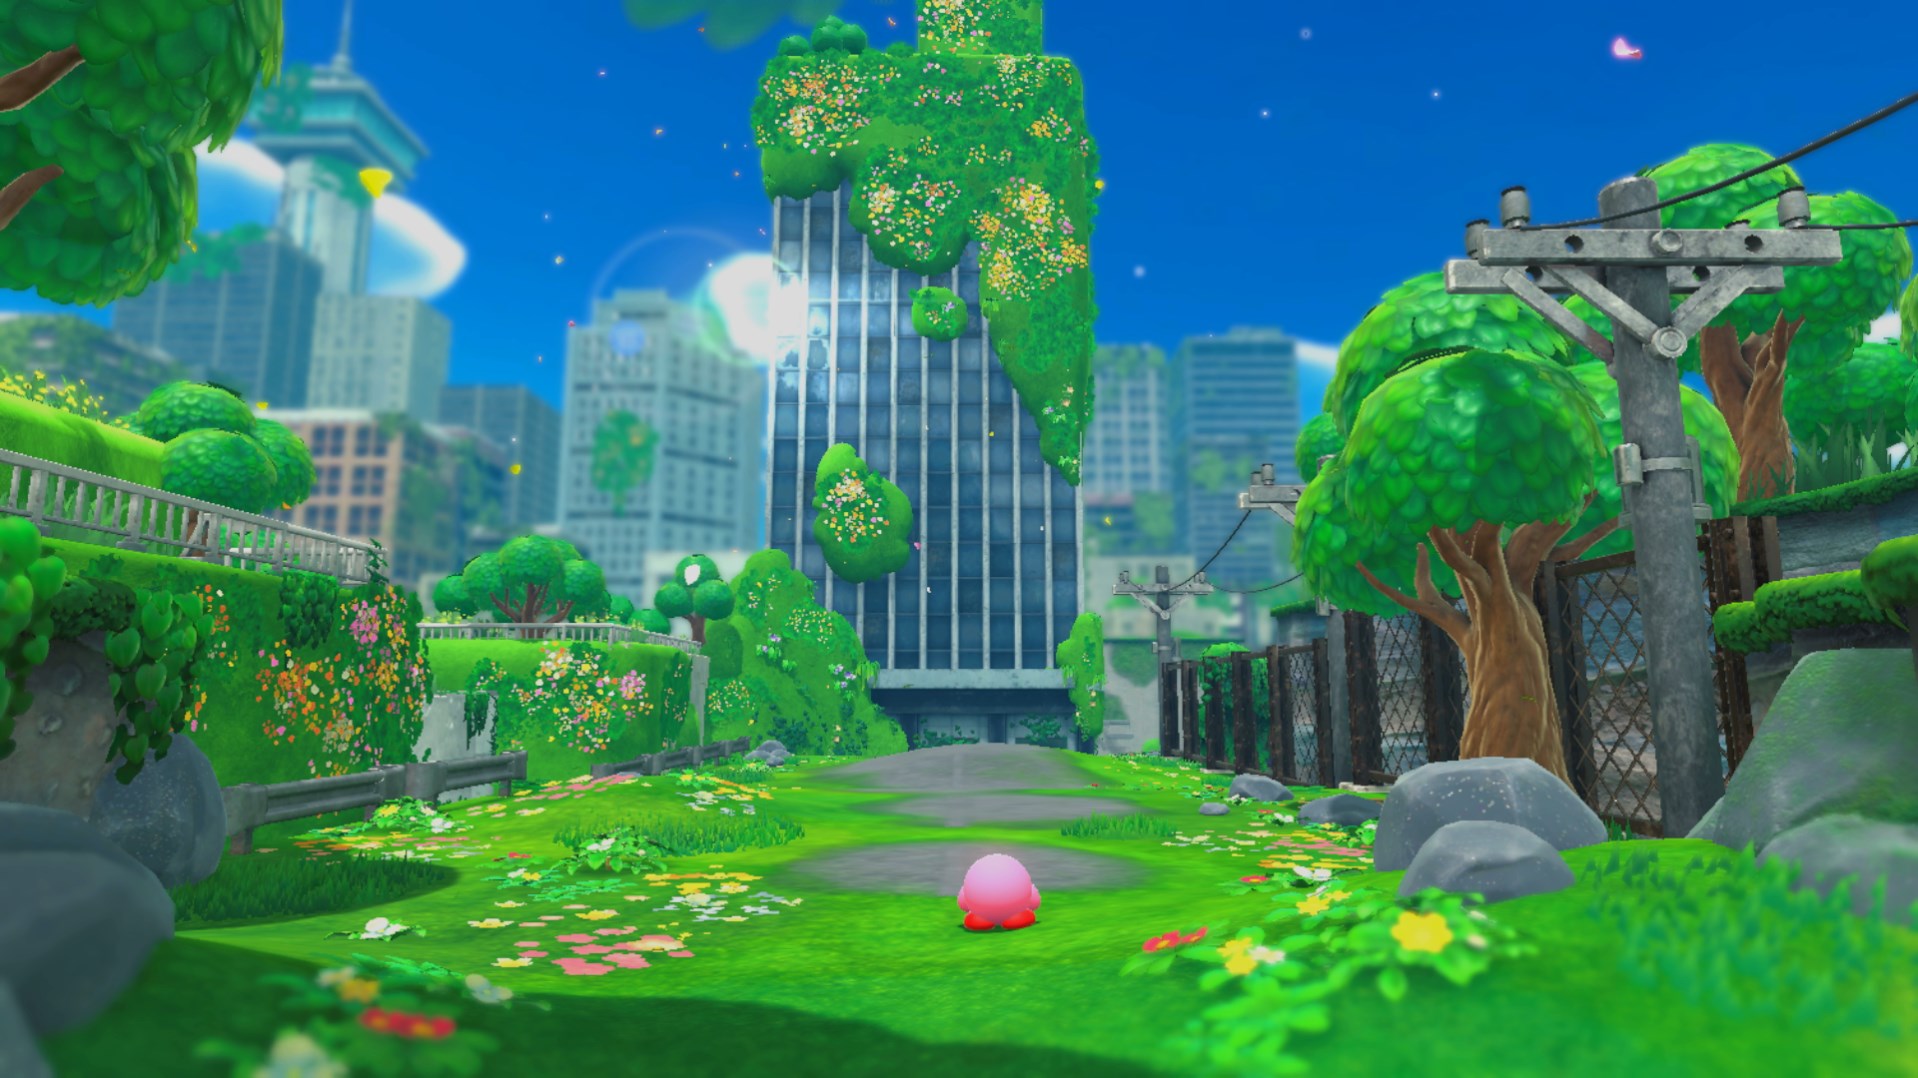 Kirby looks over a vast city with greenery grown over everything